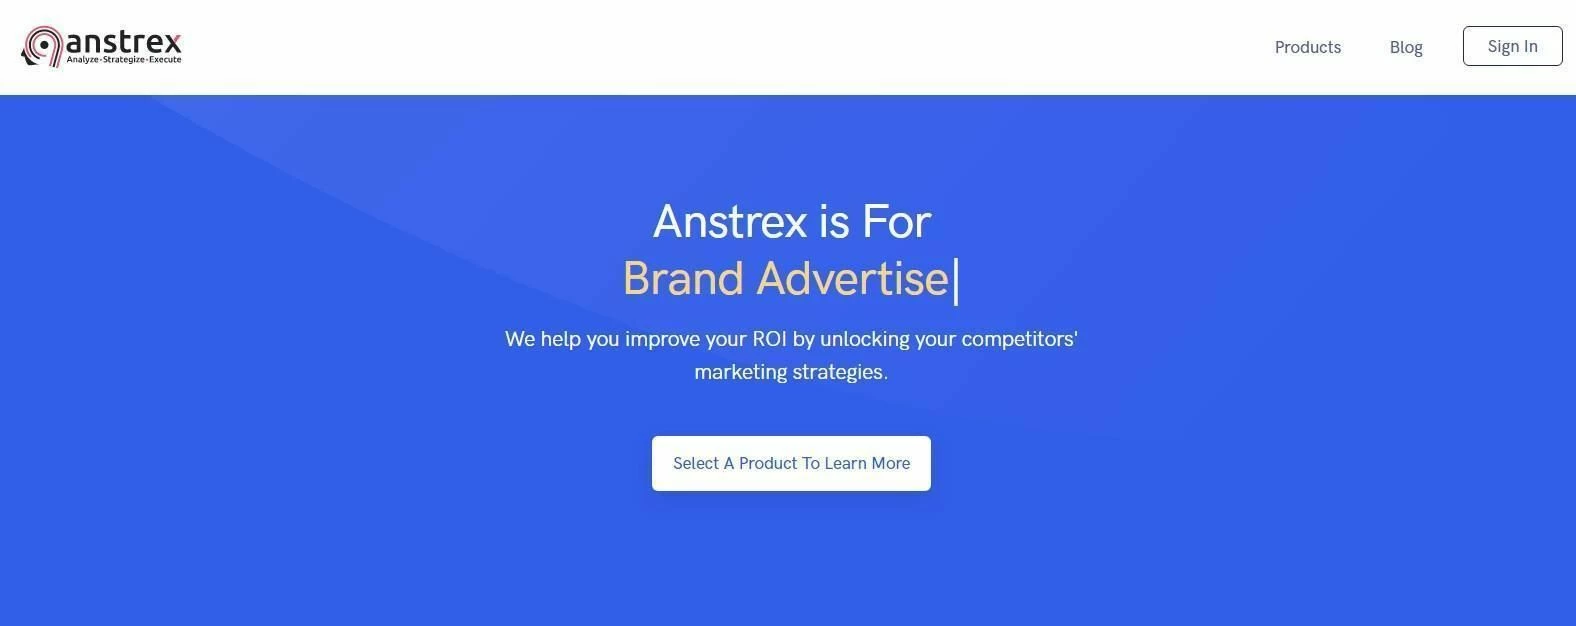 Anstrex main page